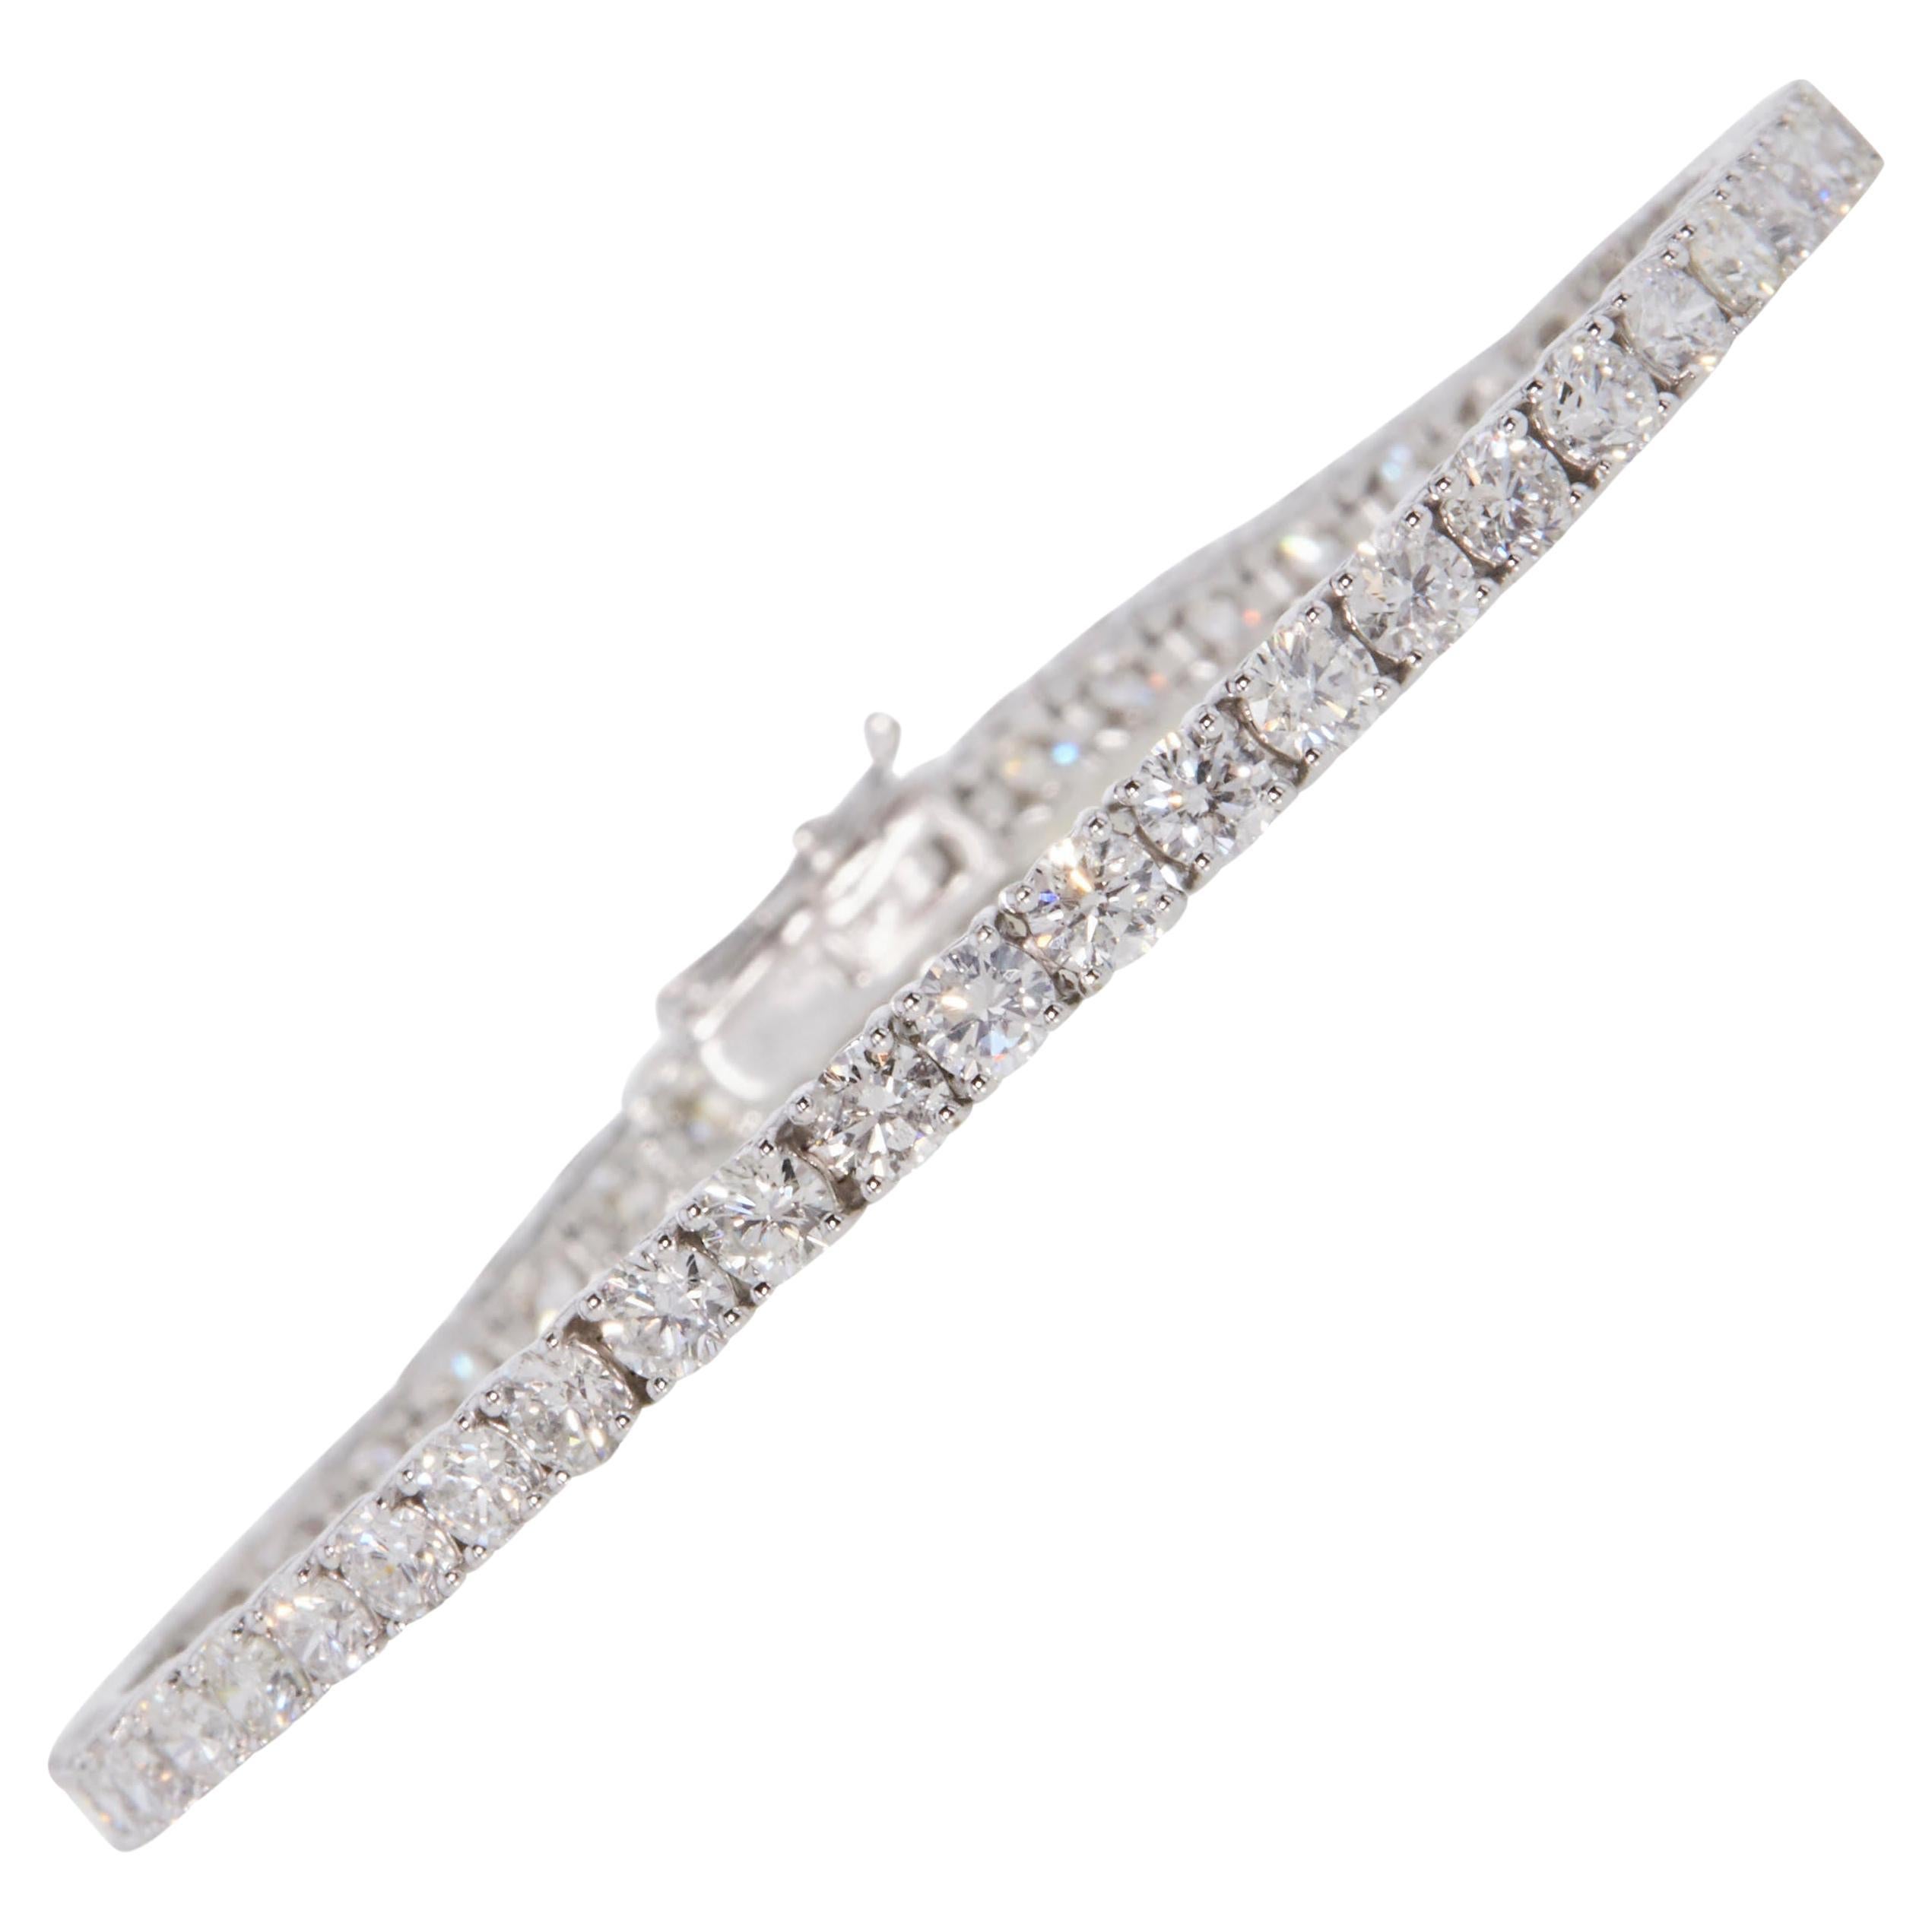 Classic Near 5 1/2 carat round natural diamond tennis link bracelet in 14k white gold. 63 round brilliant natural diamonds (SI-I clarity, natural earth-mined) are hand set in this diamond tennis bracelet weighing near 5 1/2 carats.


This near 5 1/2